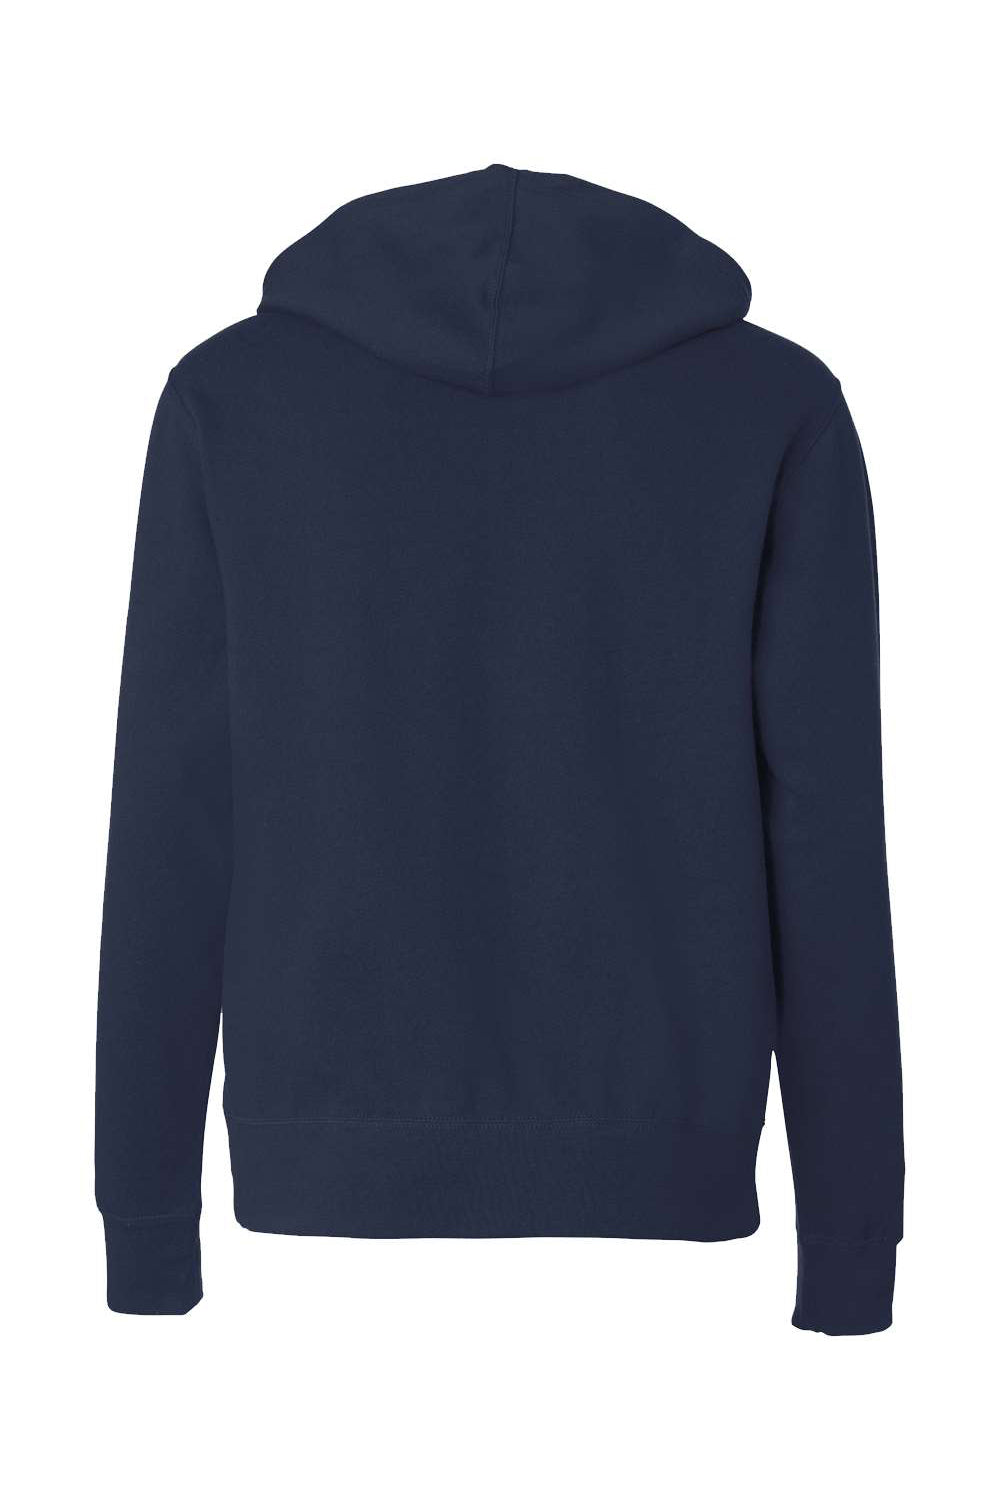 Independent Trading Co. AFX90UNZ Mens Full Zip Hooded Sweatshirt Hoodie Classic Navy Blue Flat Back